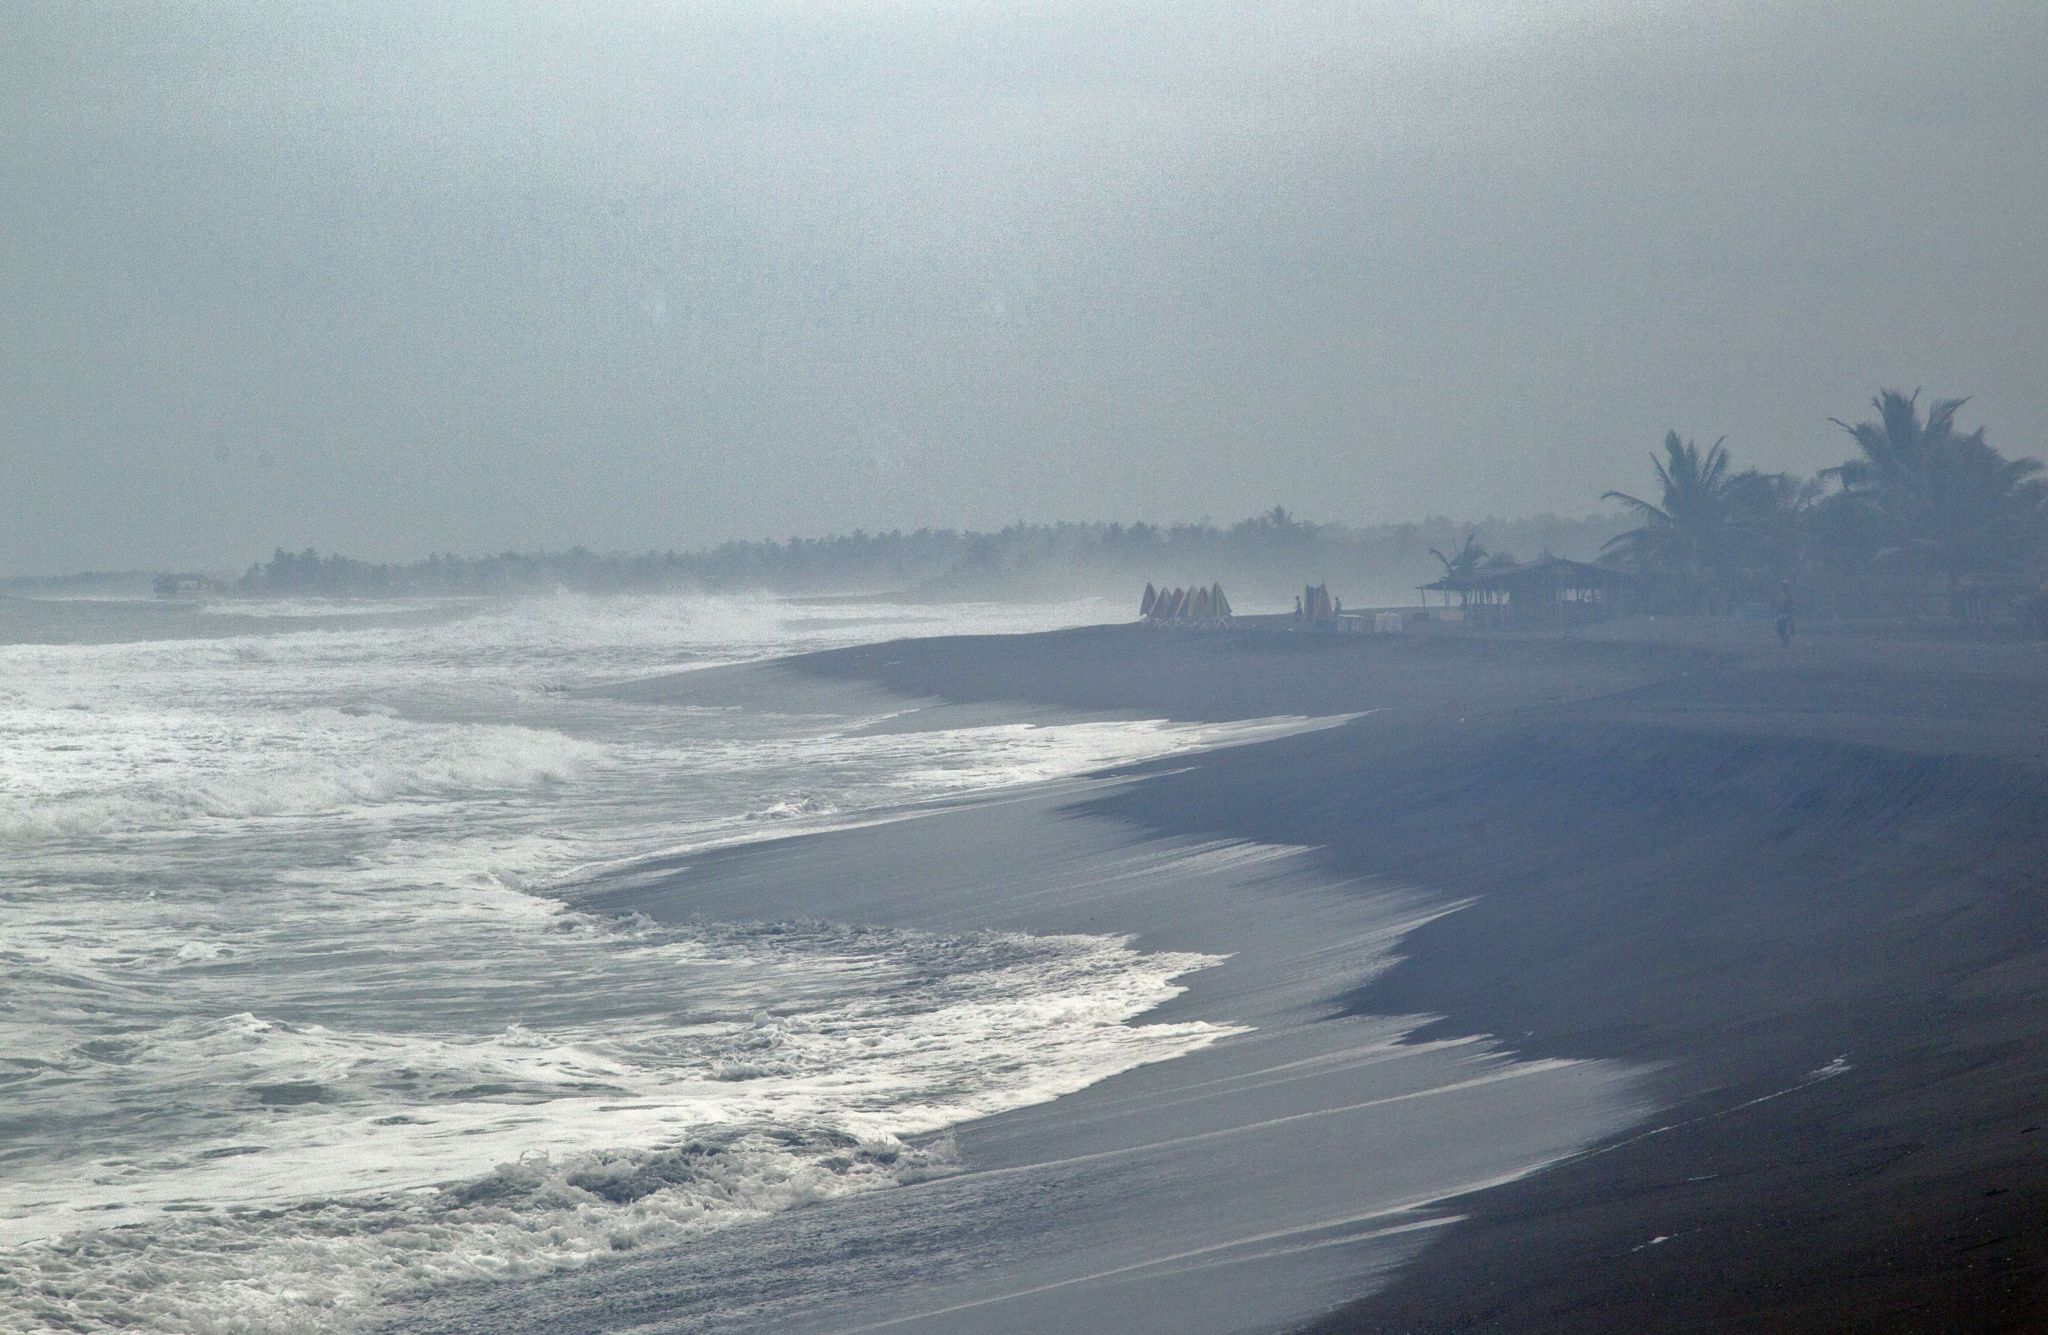 Waves break on the beach in Boca de Pascuales, Colima State, Mexico, on October 22, 2015